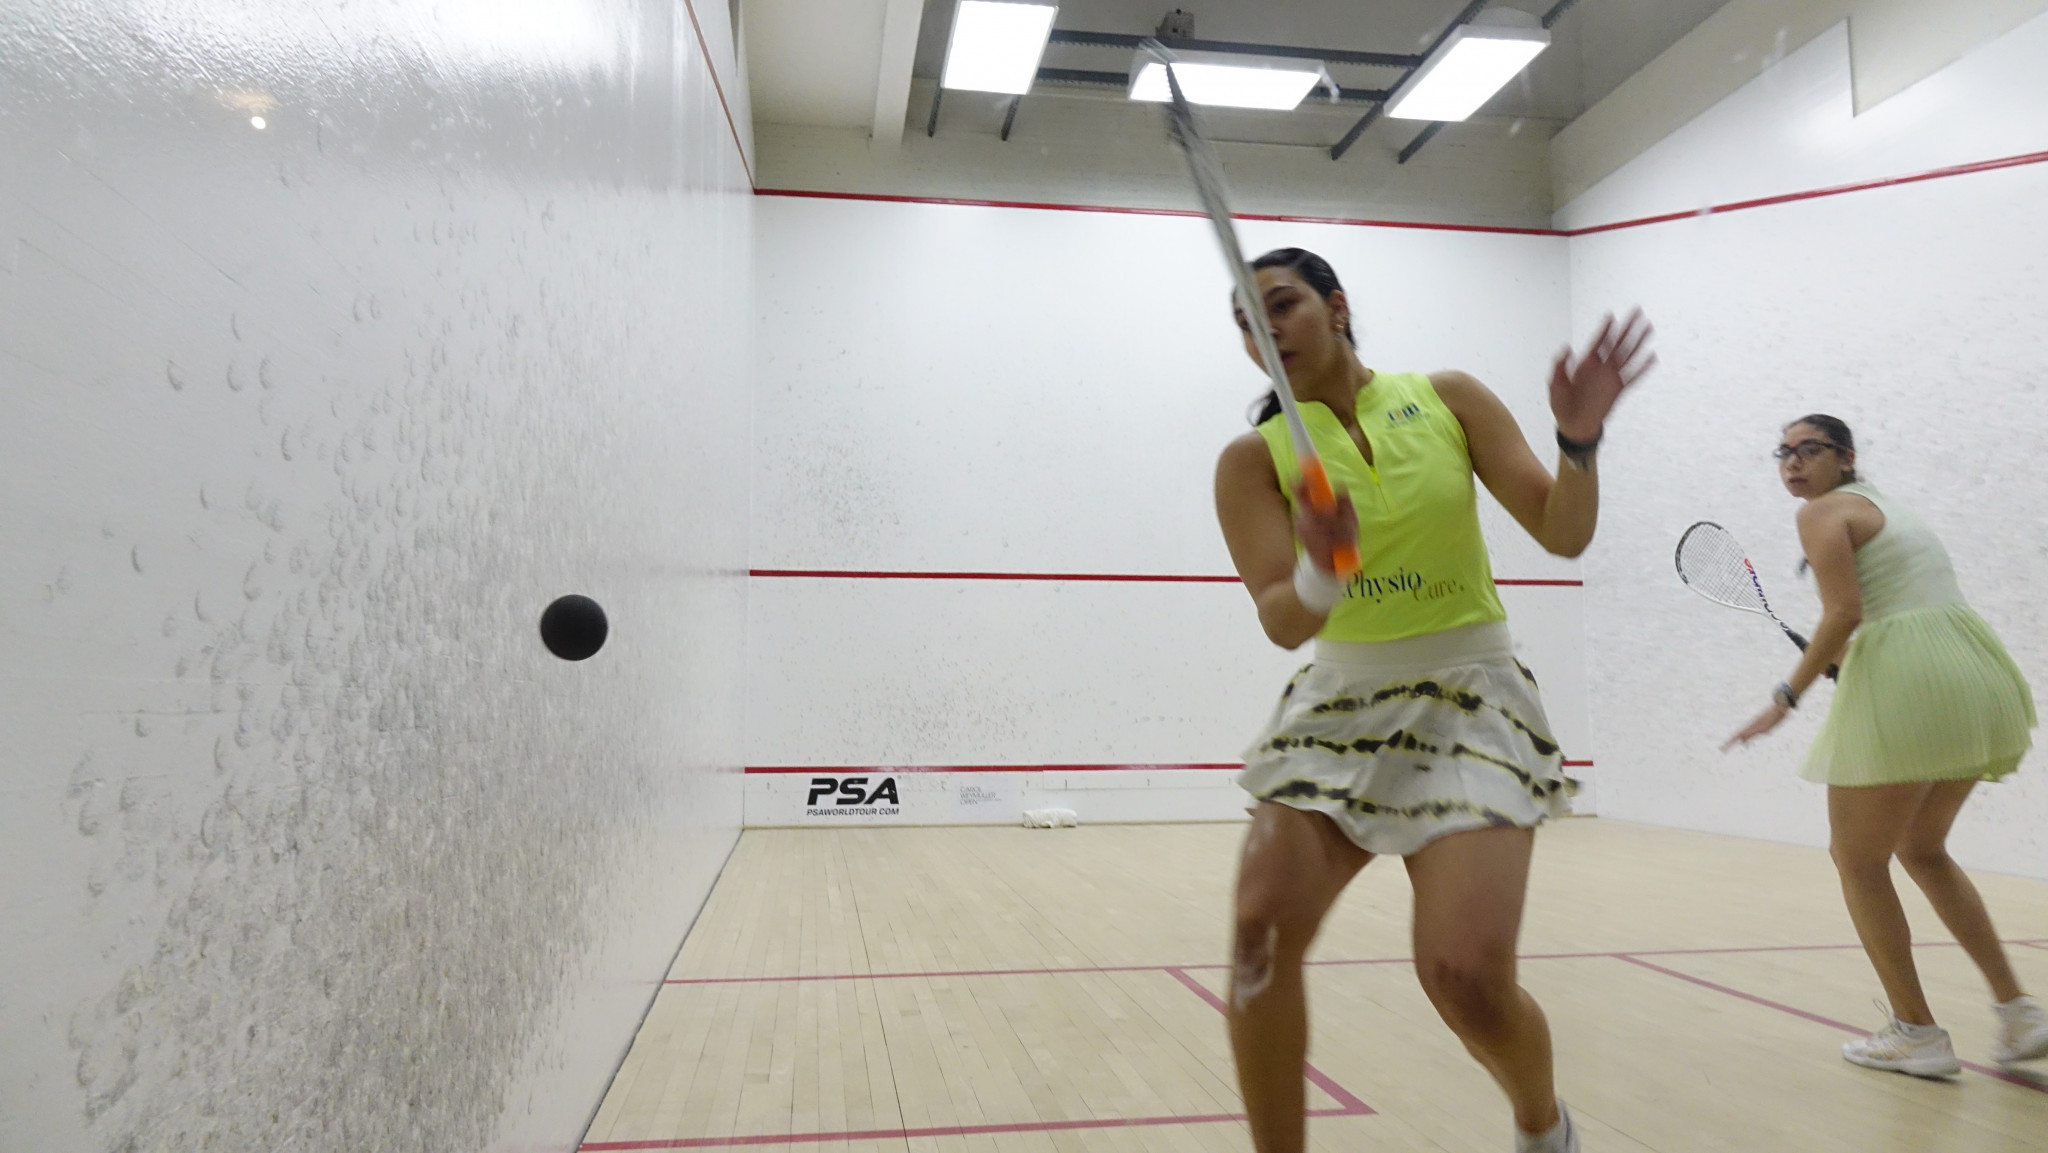 
Farida Mohamed already knows what it's like to win a PSA World Tour event. PSA